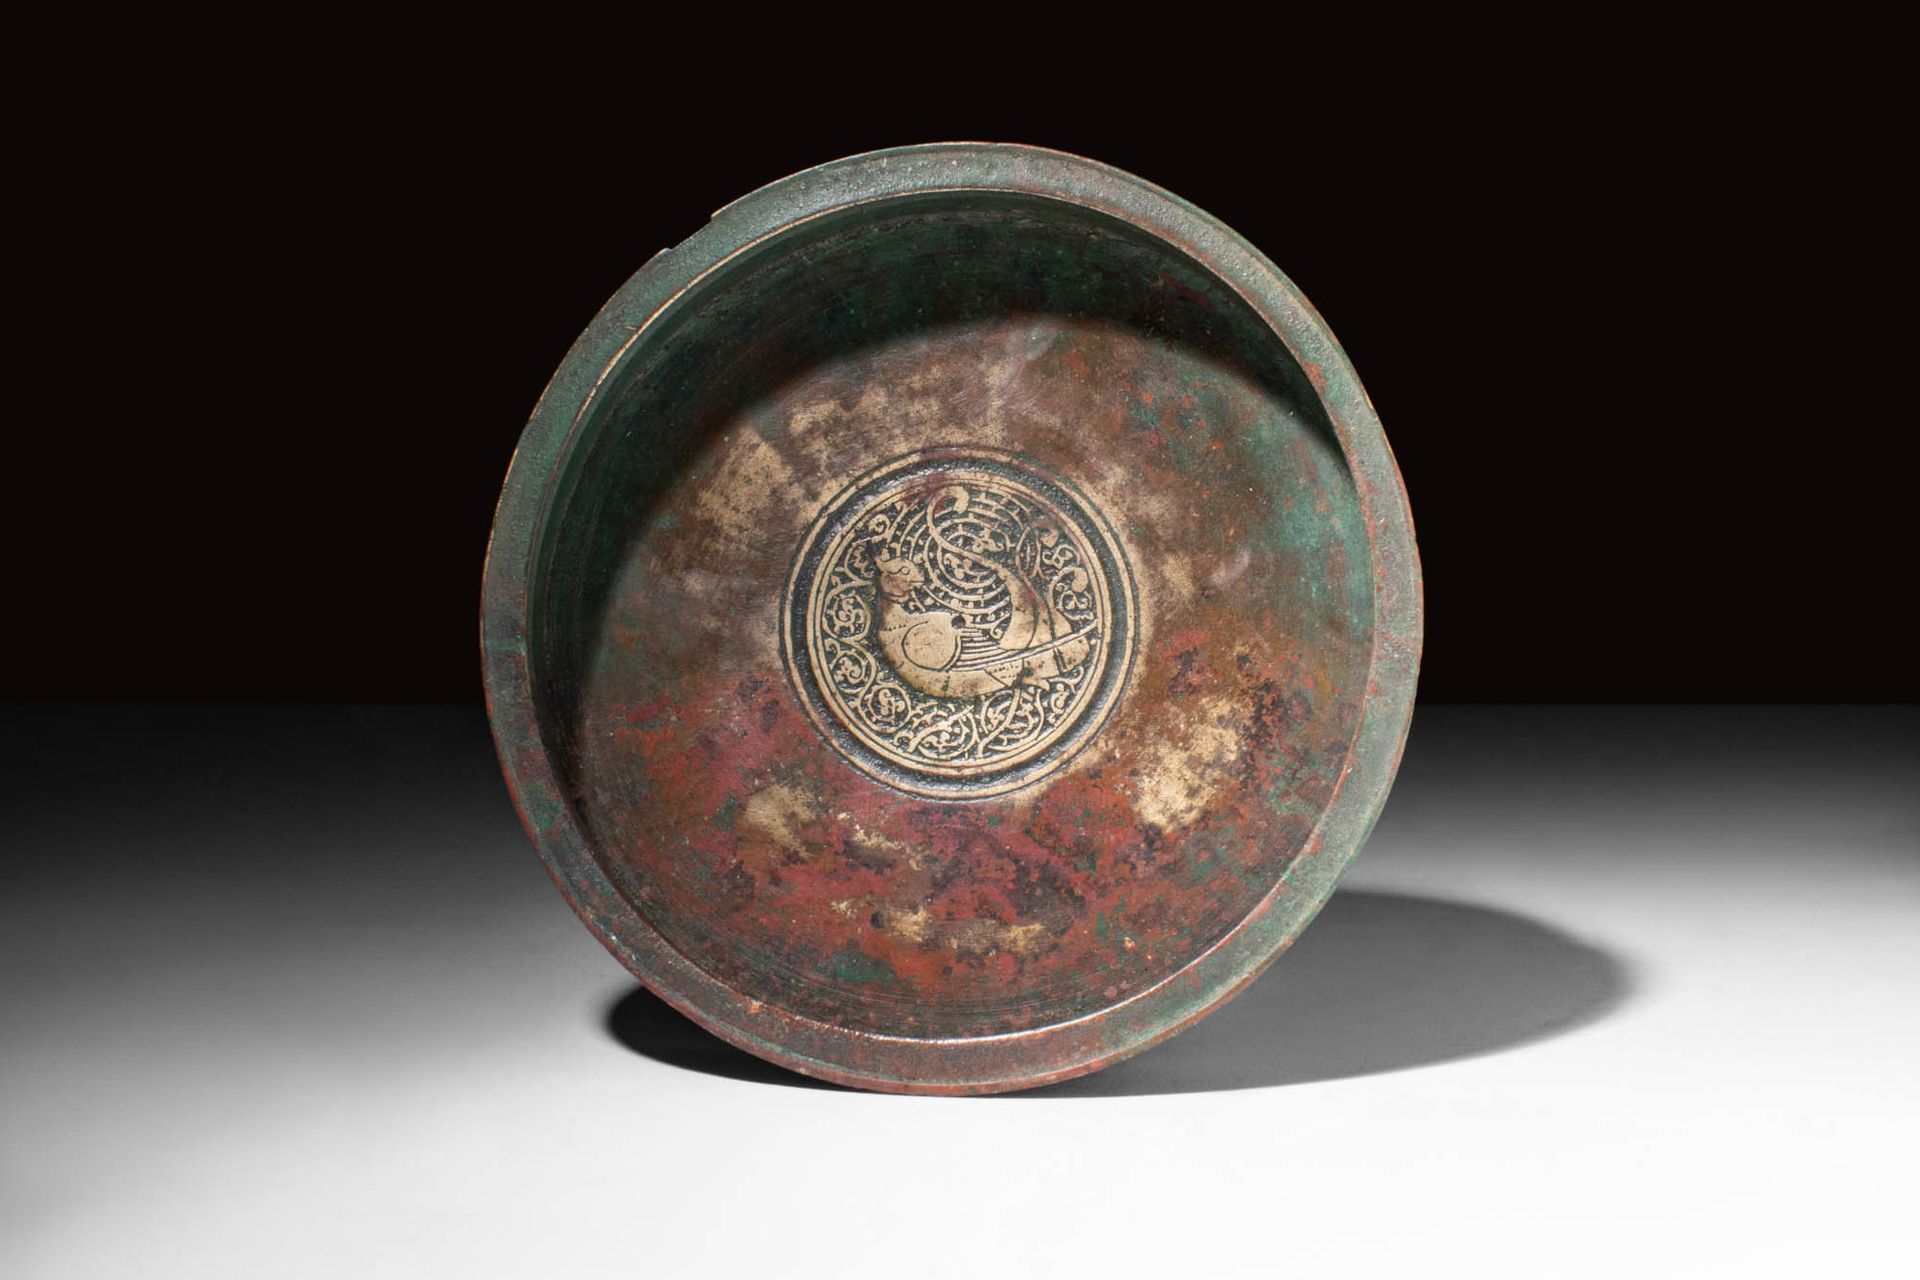 MEDIEVAL SELJUK COPPER ALLOY GILDED DECORATED TRAY Ca. AD 1100 - 1300.
An mediev&hellip;